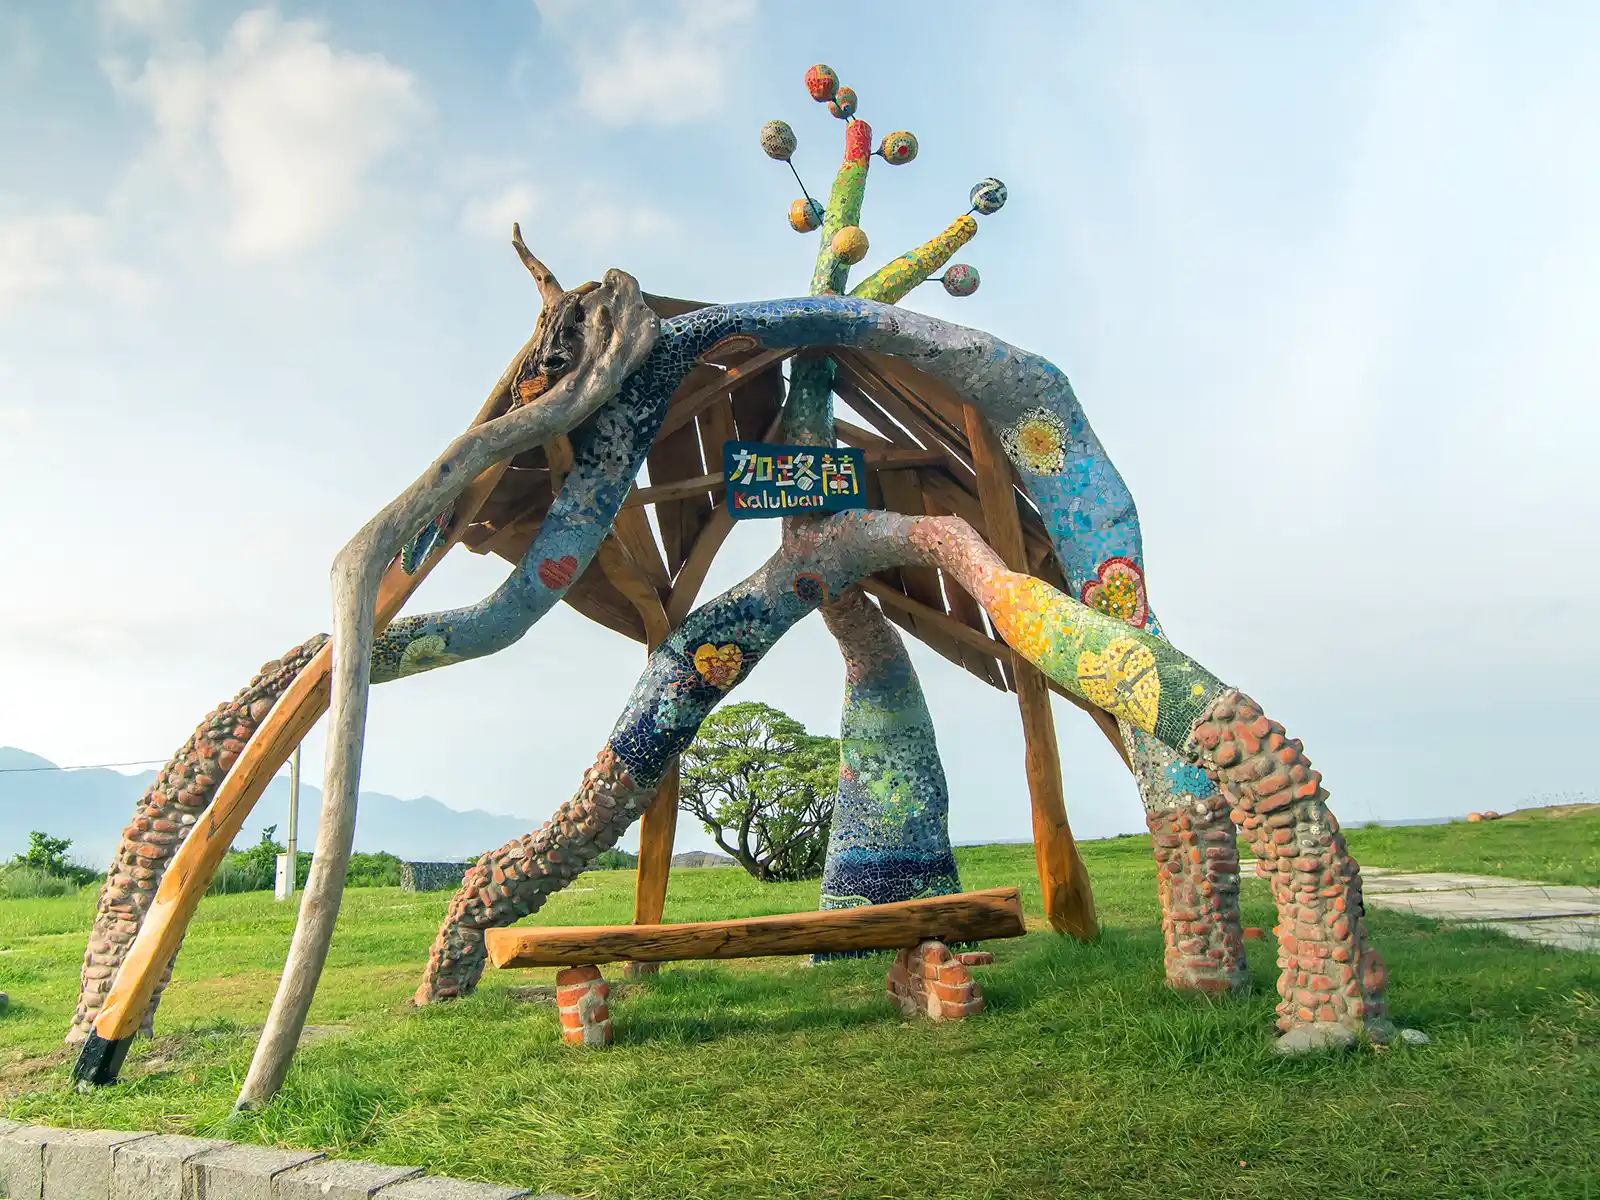 A multi-legged and colorful artwork, that doubles as a shelter covers a bench.